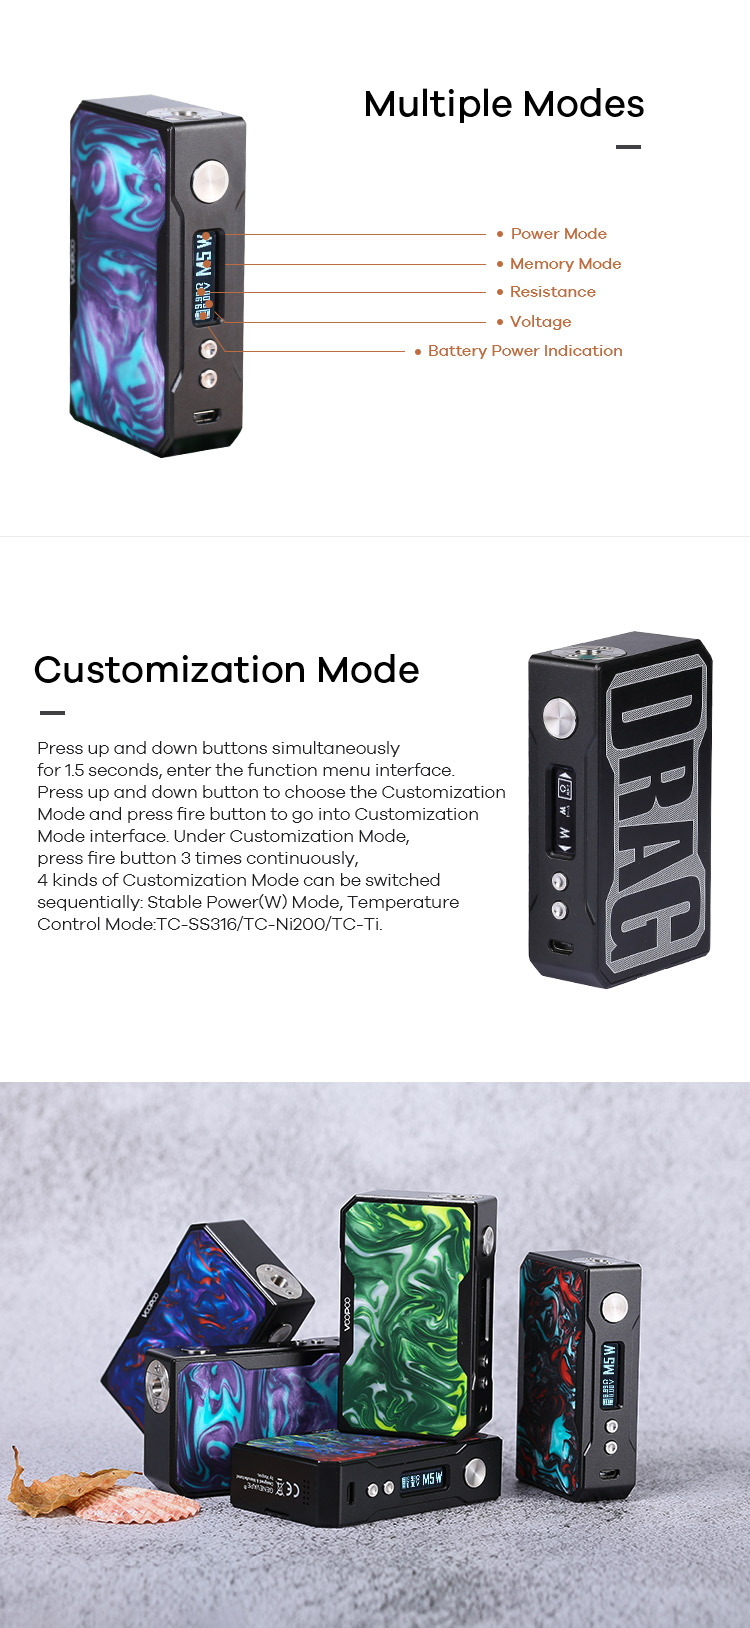 VOOPOO DRAG Mod Support Multiple Modes and customization